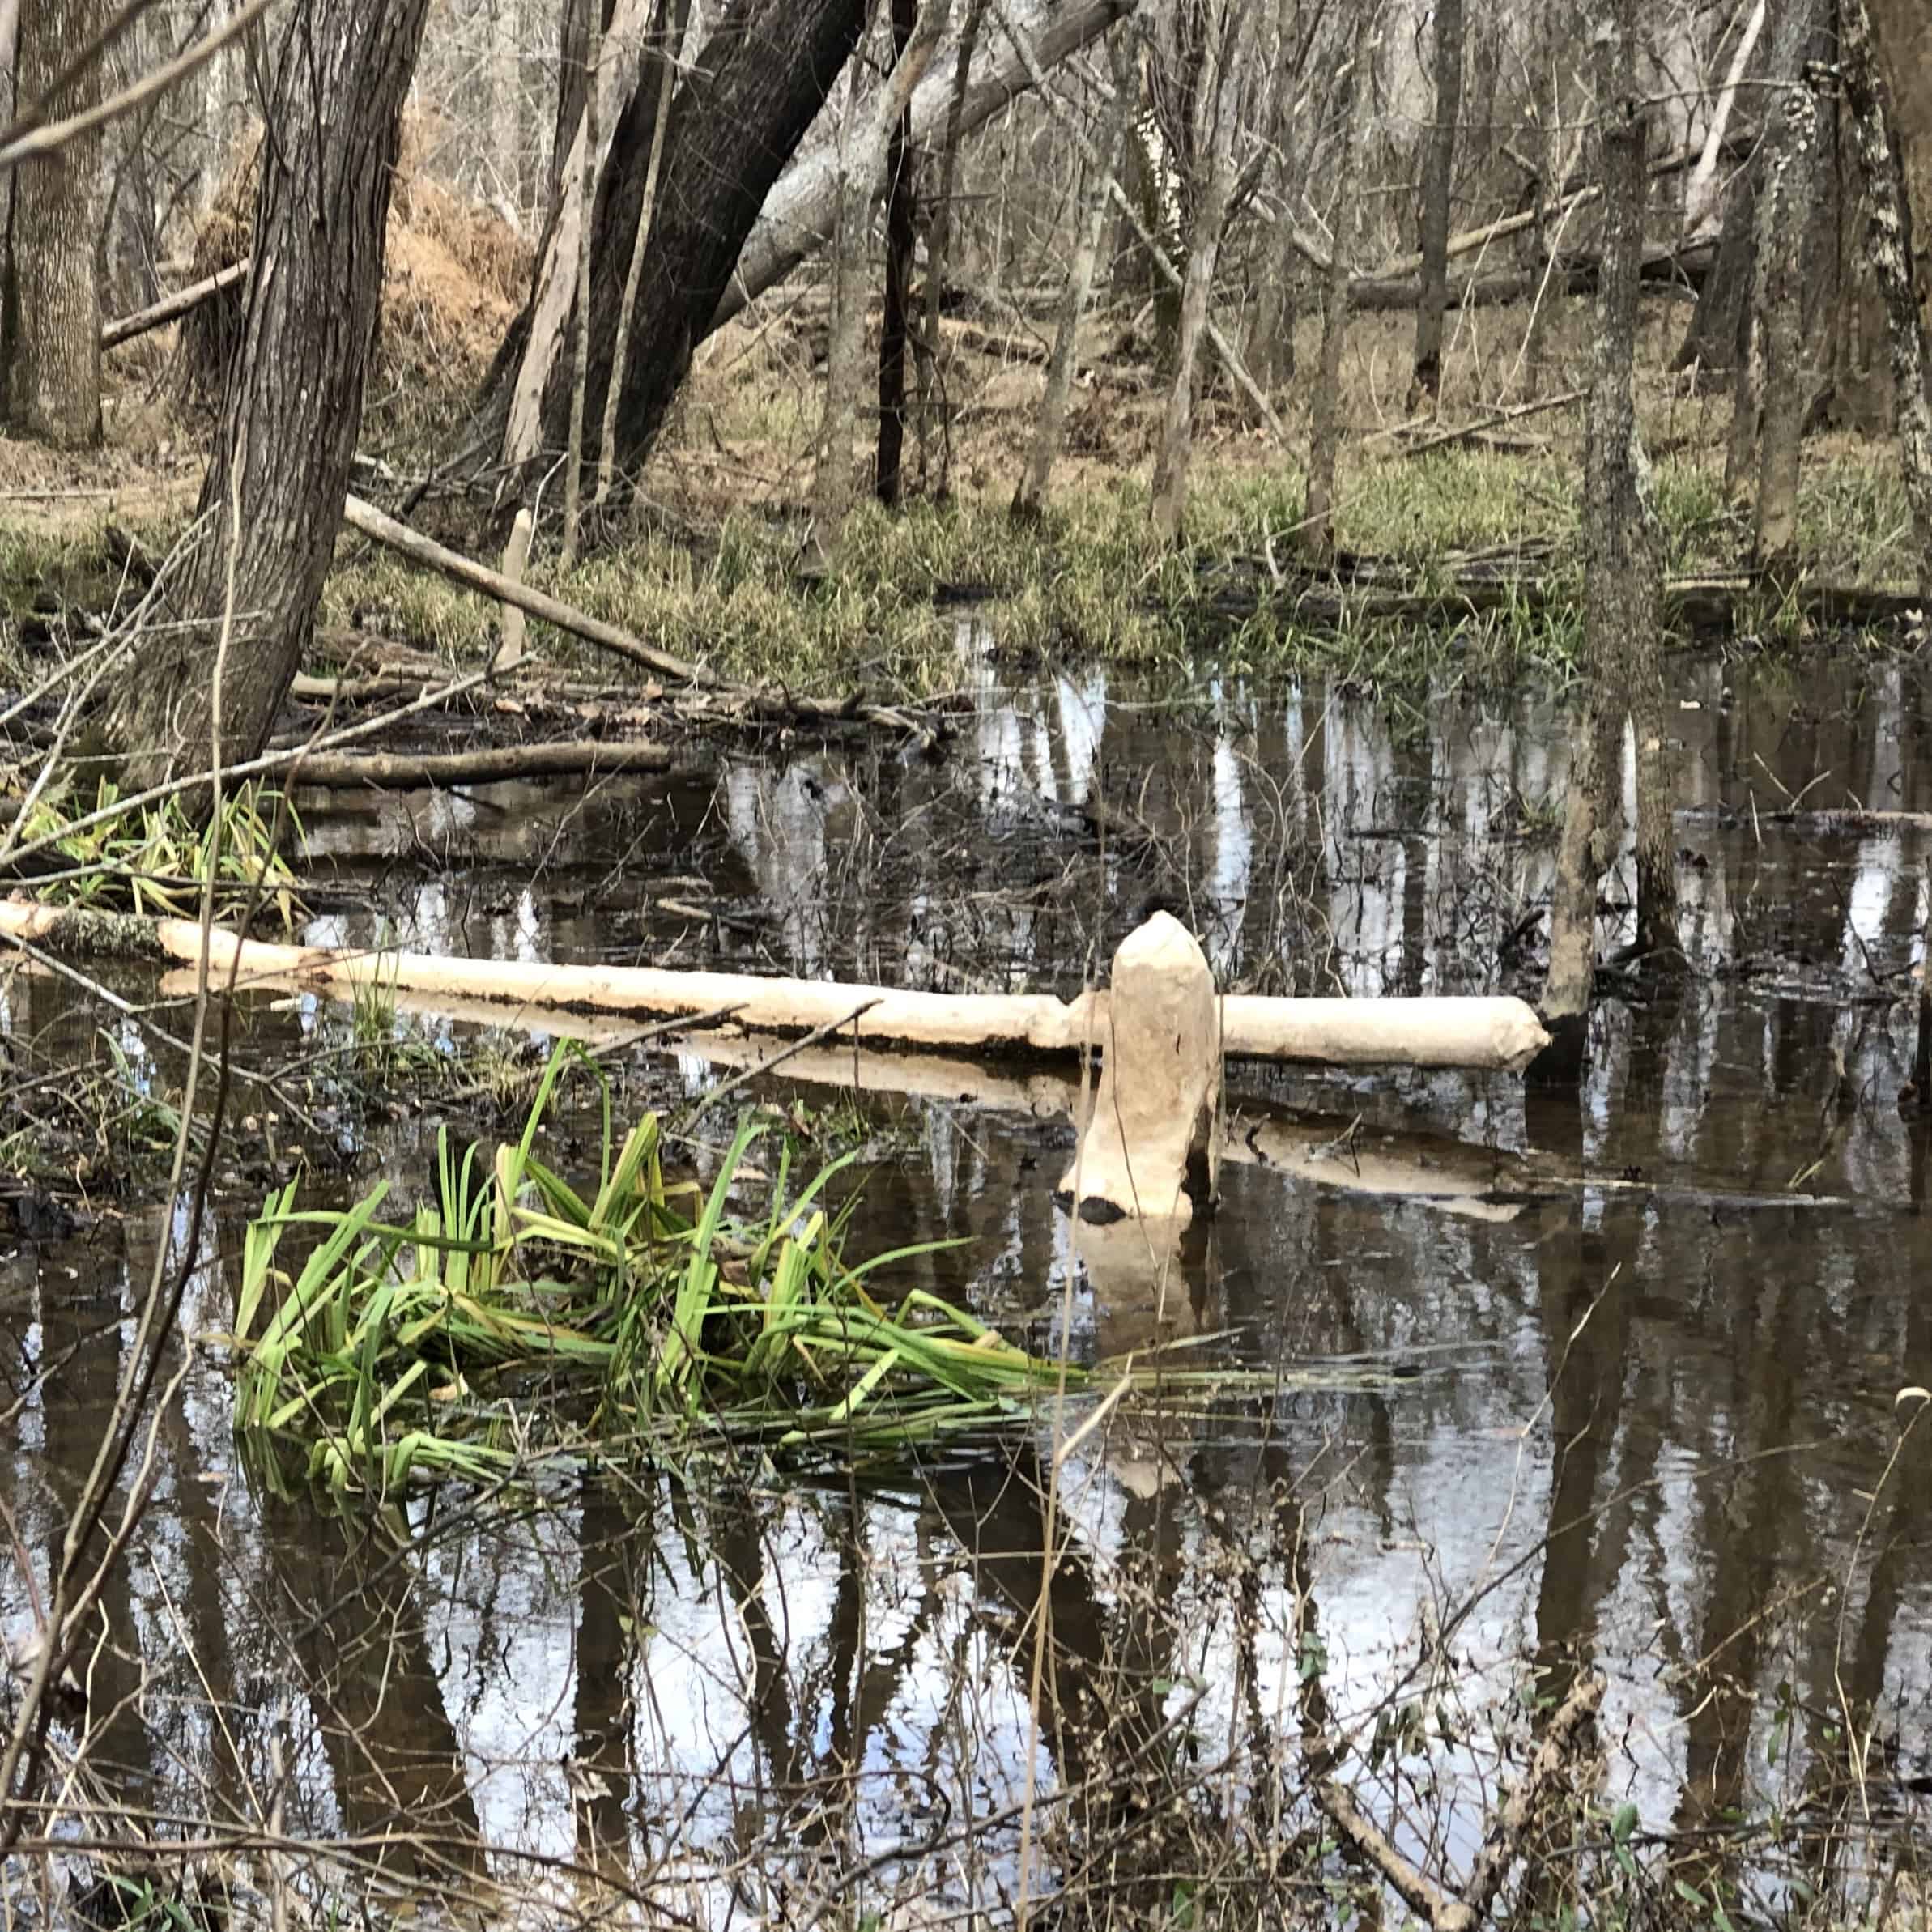 Beaver activity in a swampy forest area. 